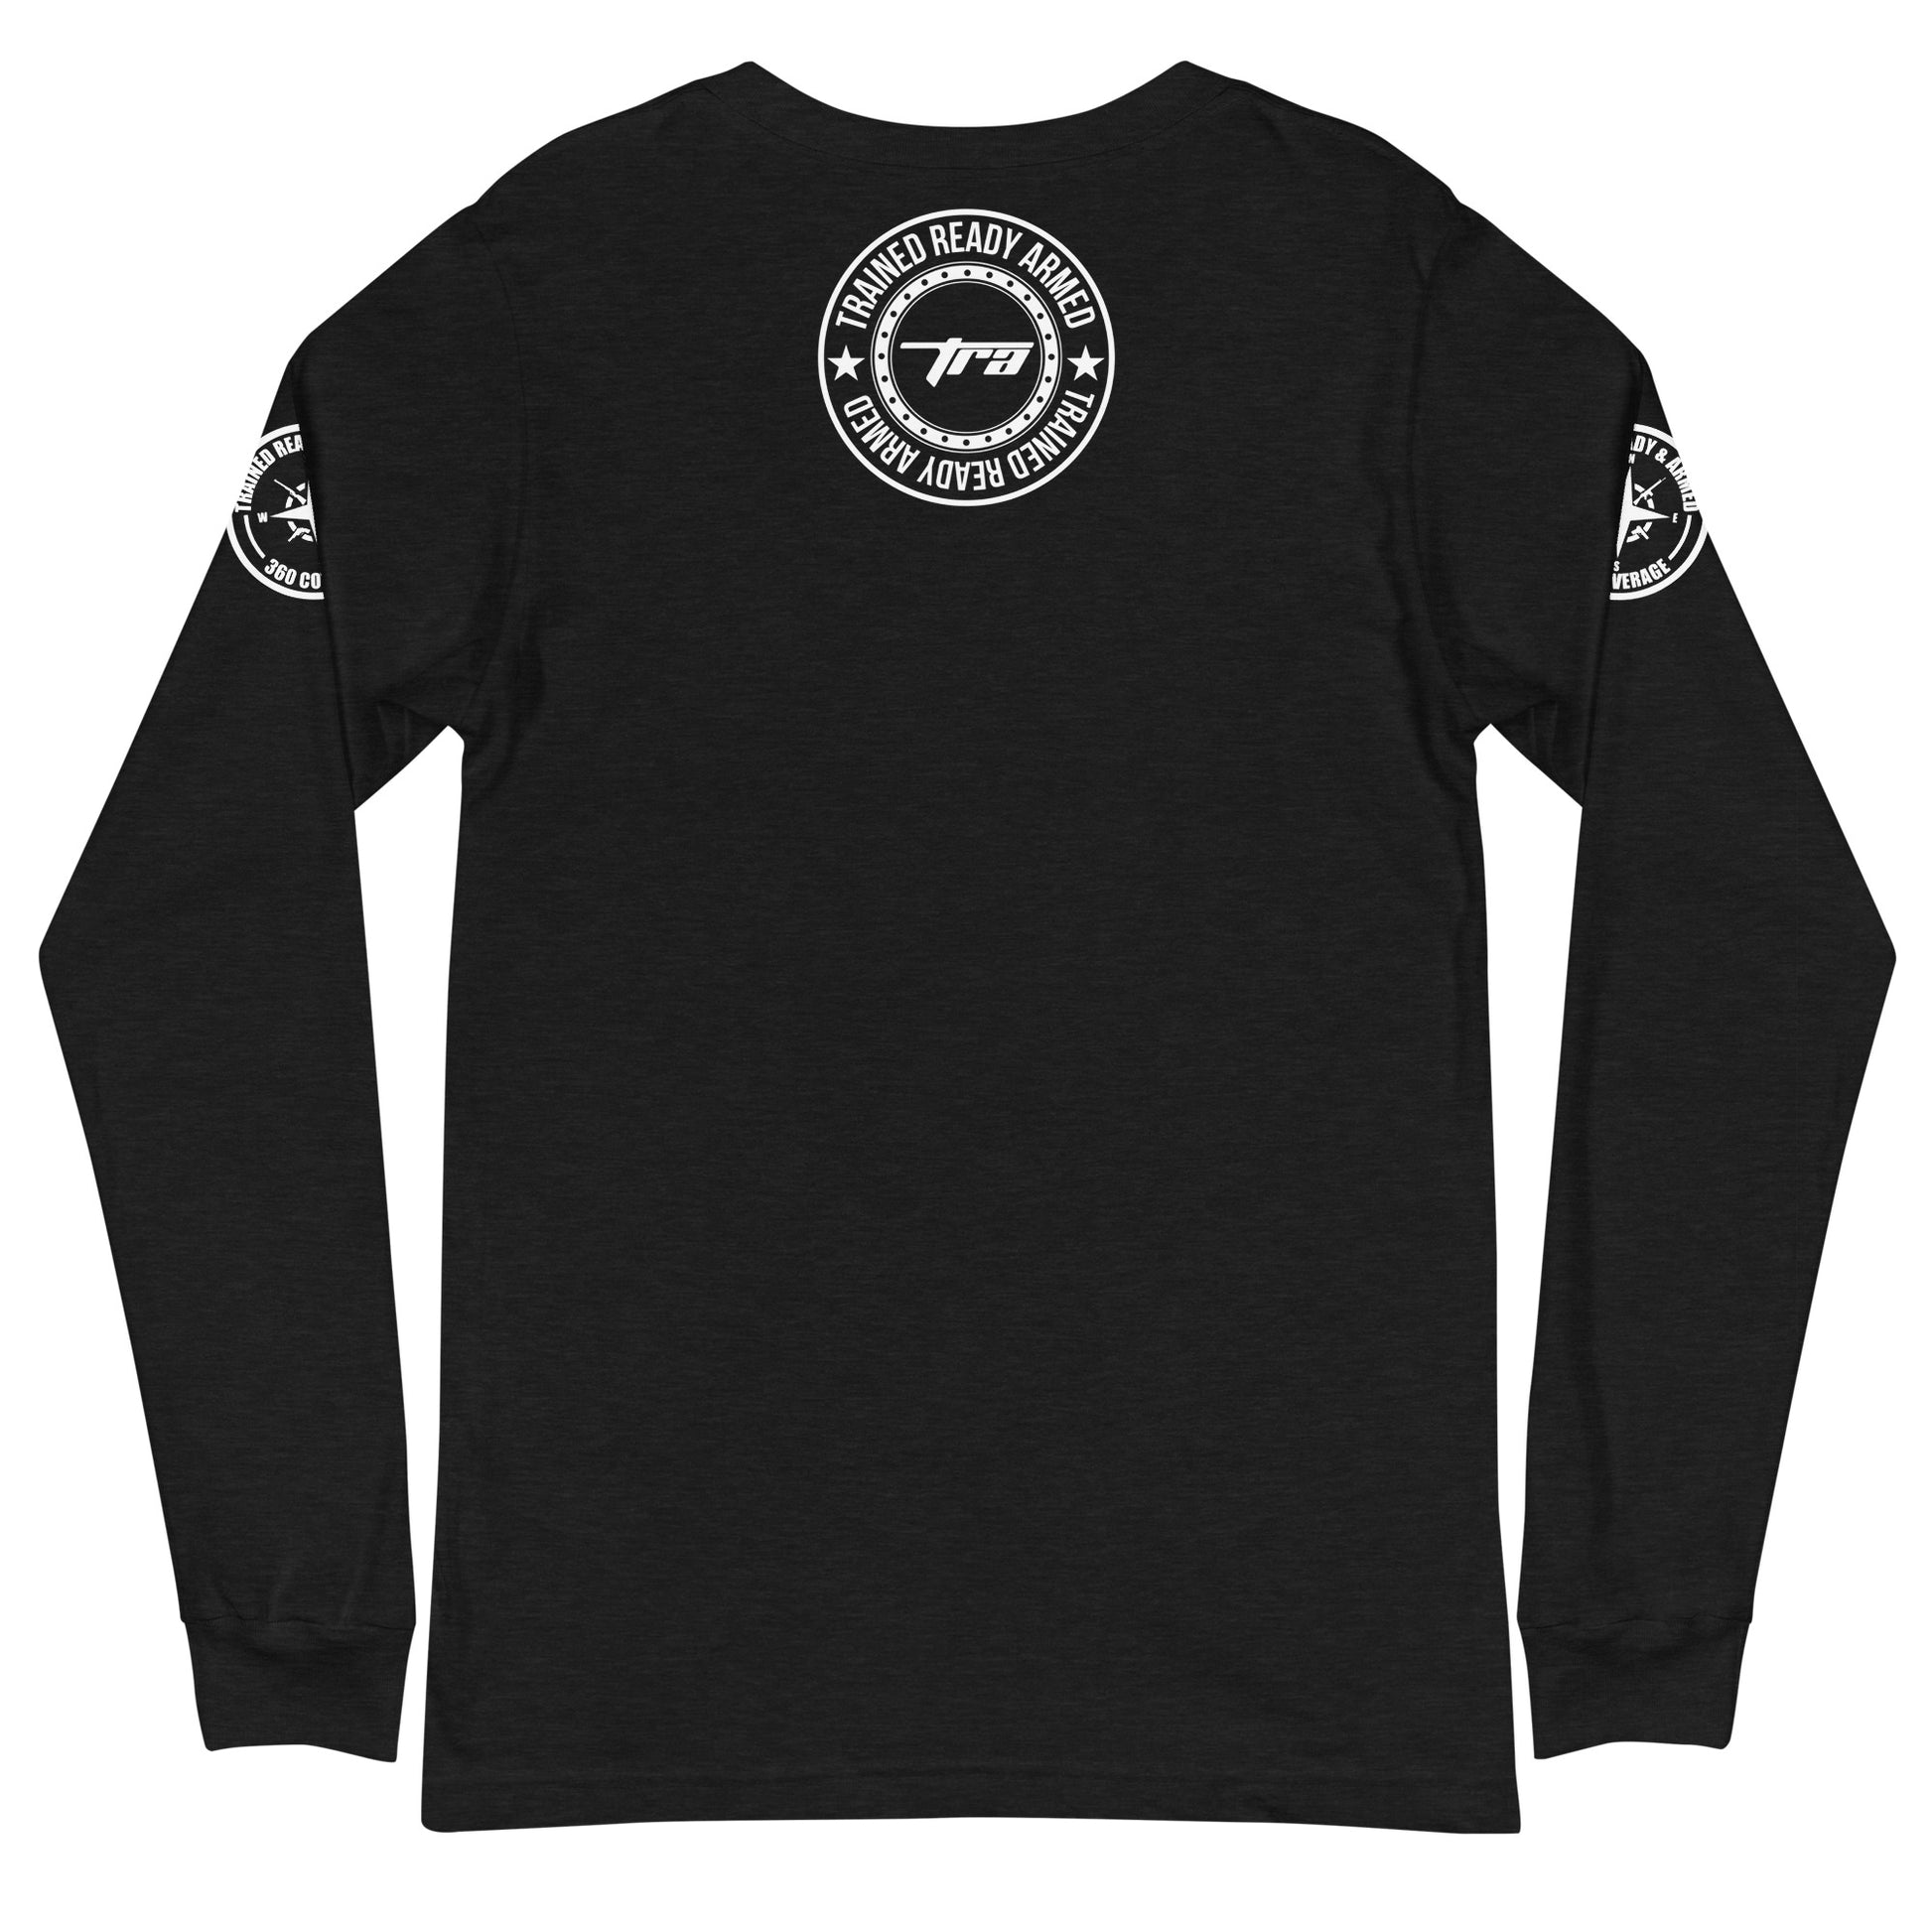 TRAINED READY & ARMED 1.0 MEN'S  Long Sleeve Tee - Trained Ready Armed Apparel